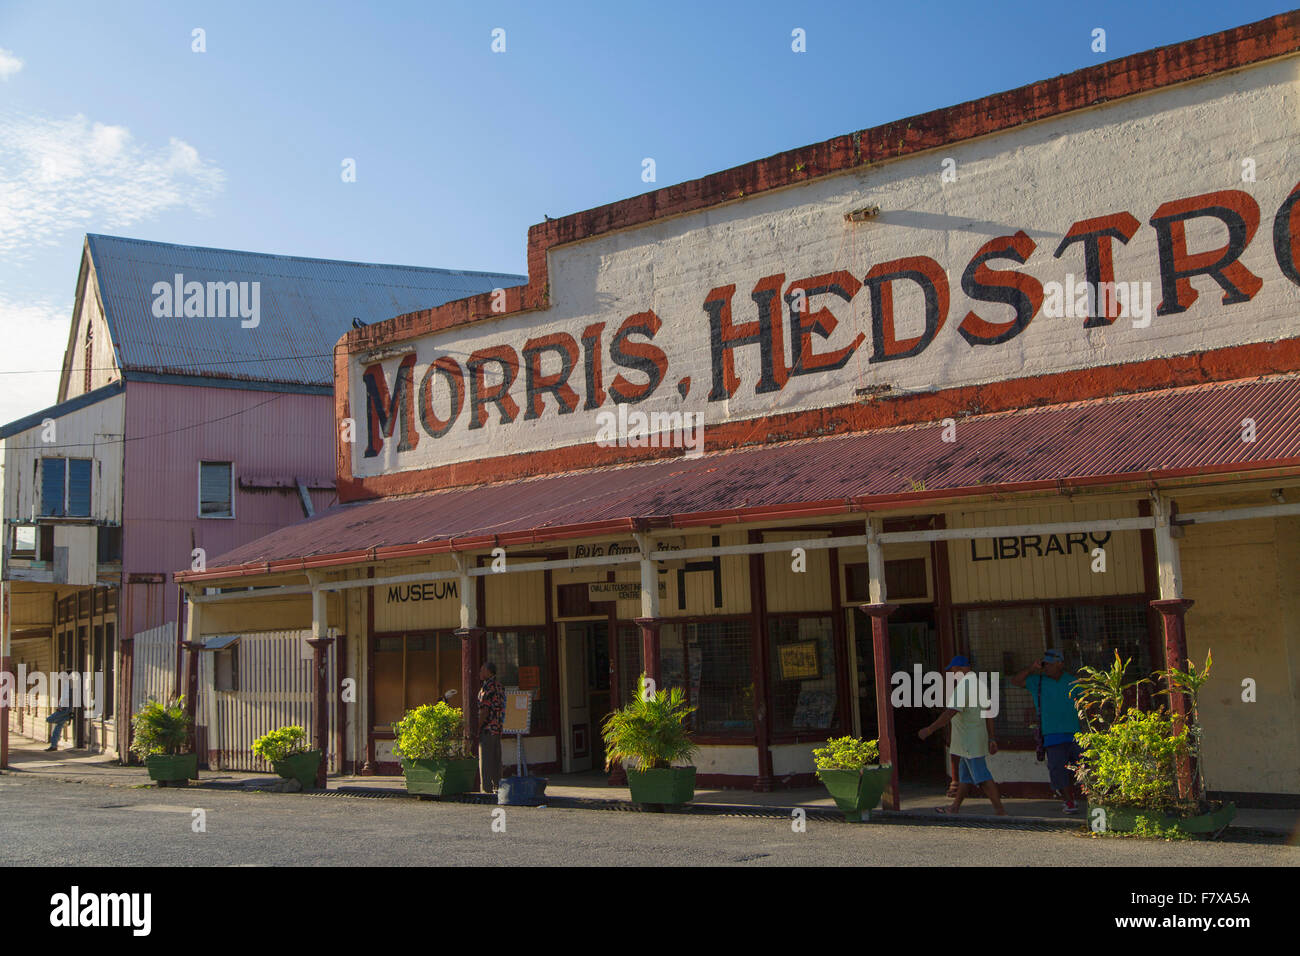 Former Morris Hedstrom Trading Store (first trading store in Fiji), Levuka (UNESCO World Heritage Site), Ovalau, Fiji Stock Photo